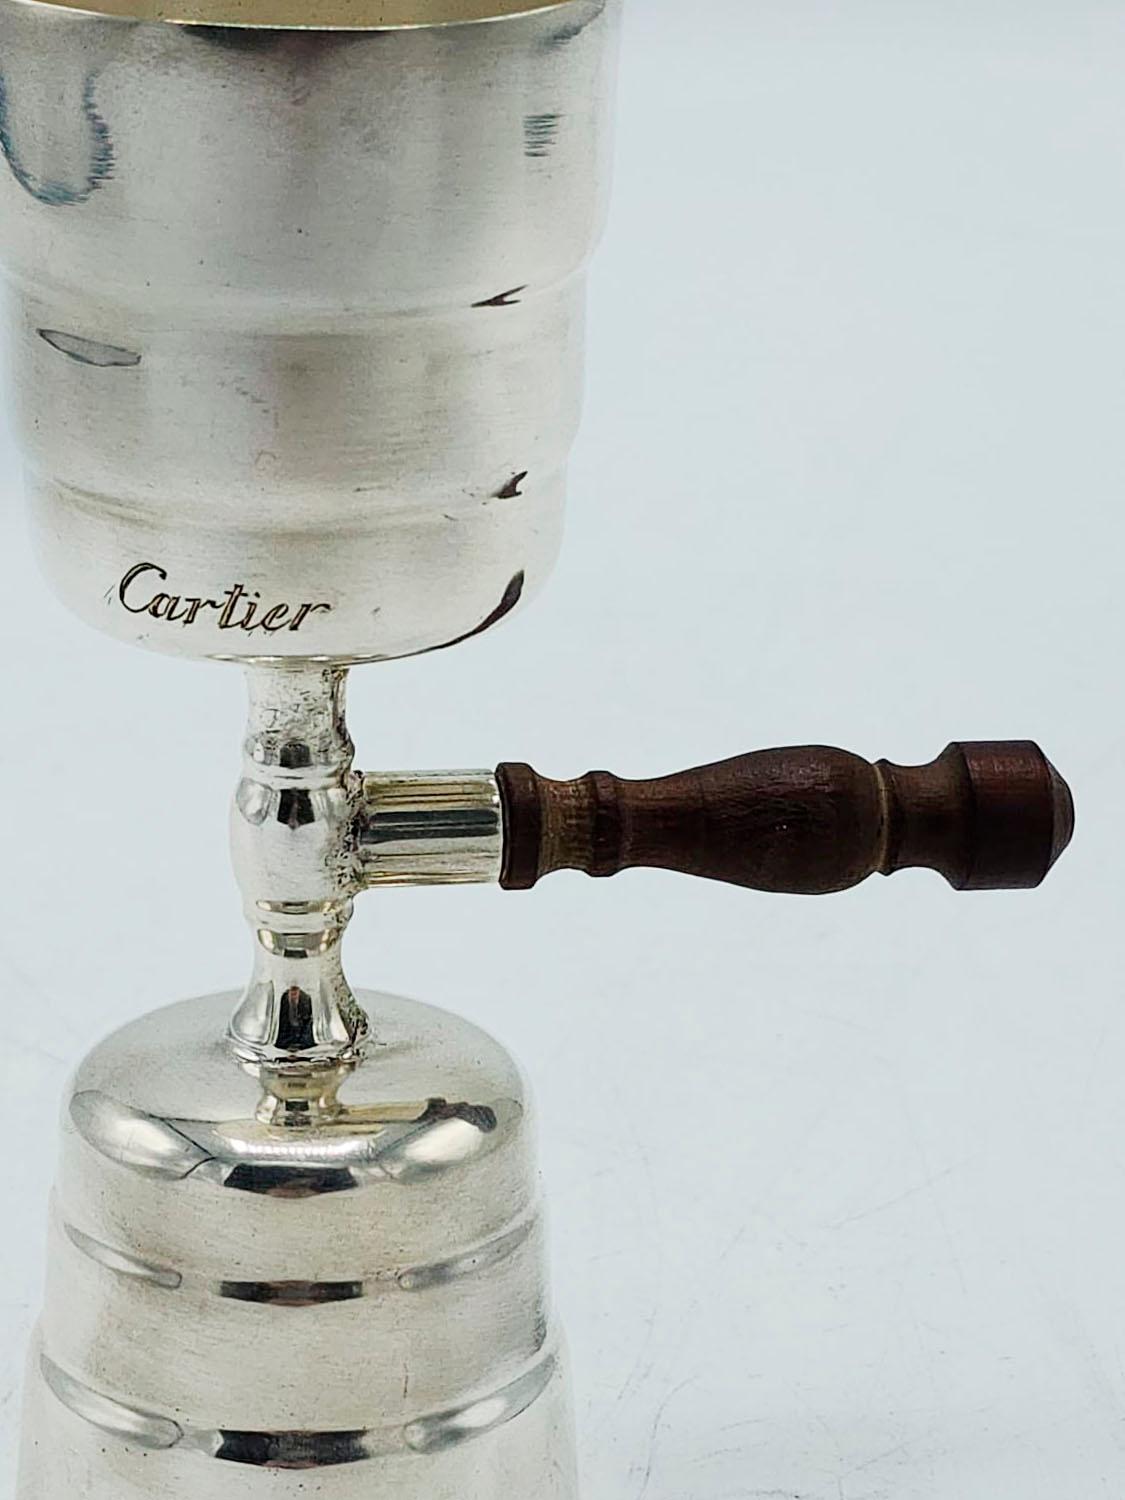 Cartier silver plated drinks measurer
with wooden handle carved with design

Measures:
Total height: 11.5 centimeters
Height of ounces: 4.5 and 4 centimeters
Diameter: 4 centimeters